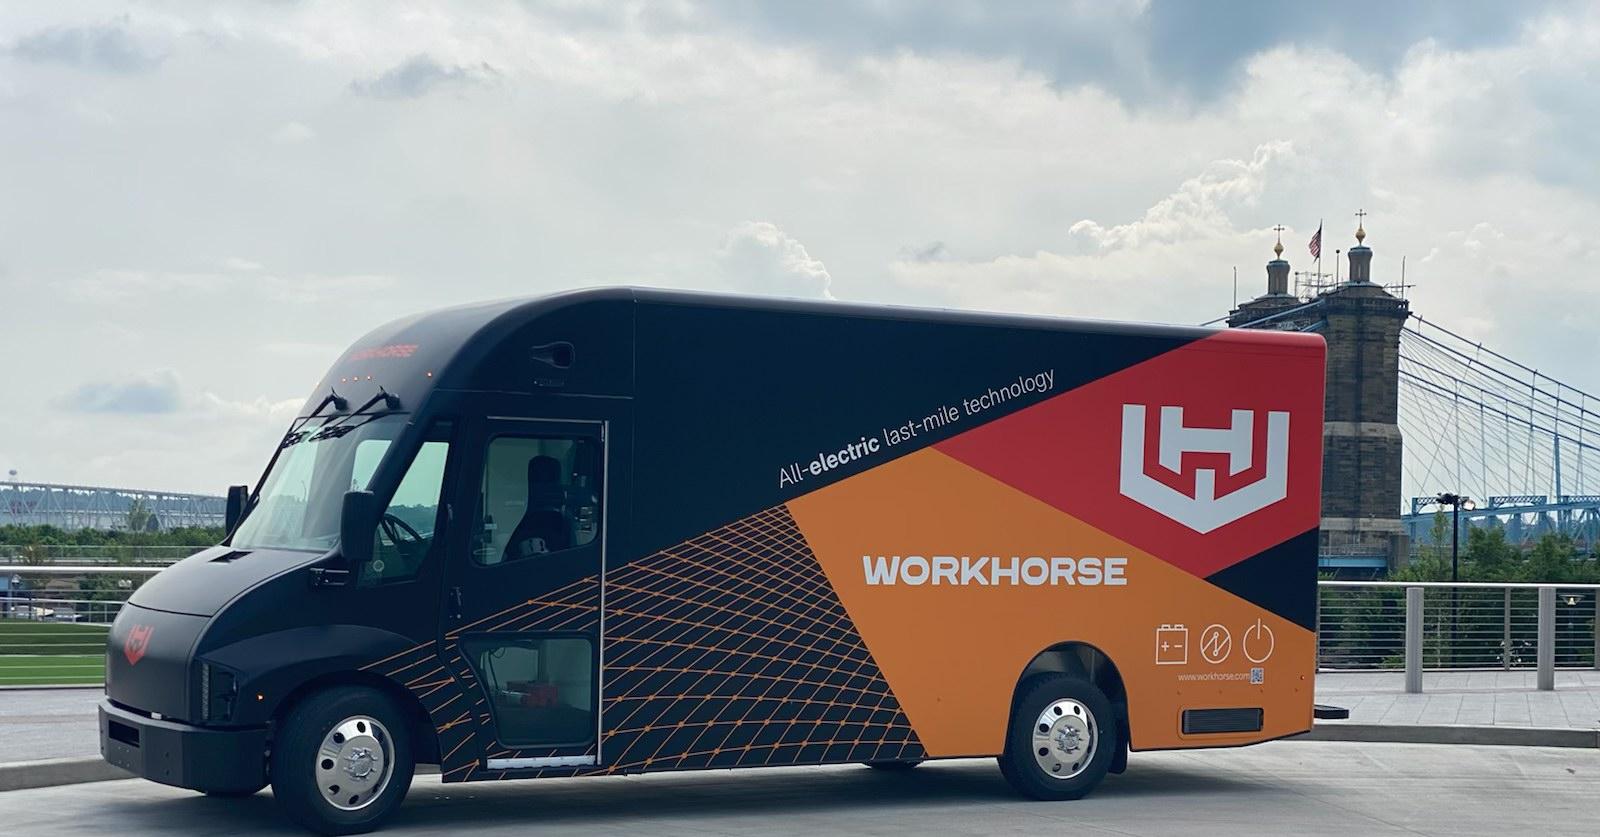 What Is Workhorse's (WKHS) Stock Forecast for 2025?